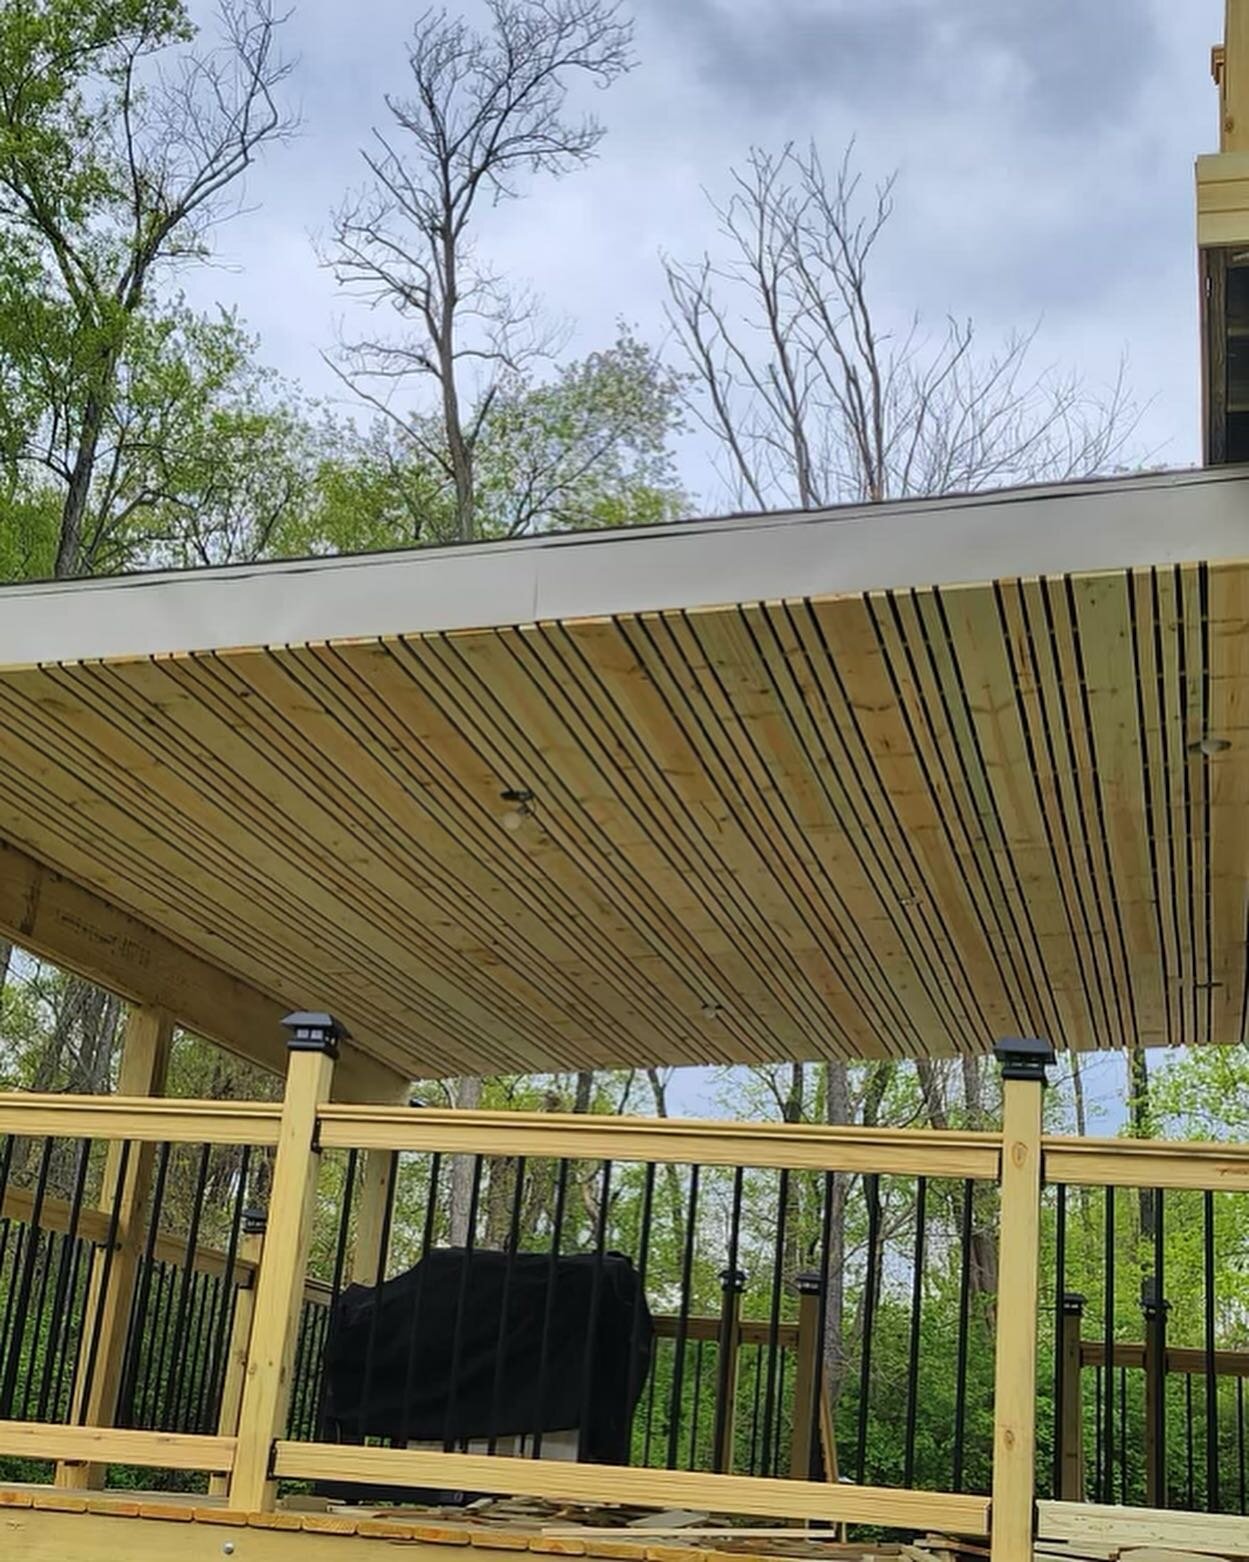 New deck! Looking good!

#diy #diyhomedecor #lakecountyindiana #remodeling #renovationproject #kitchen #interiordesign #homedecor #mykitchen #houseflipping #interior #architecture #painting #countertops #design #homestyling #homestyle #aesthetic #kit